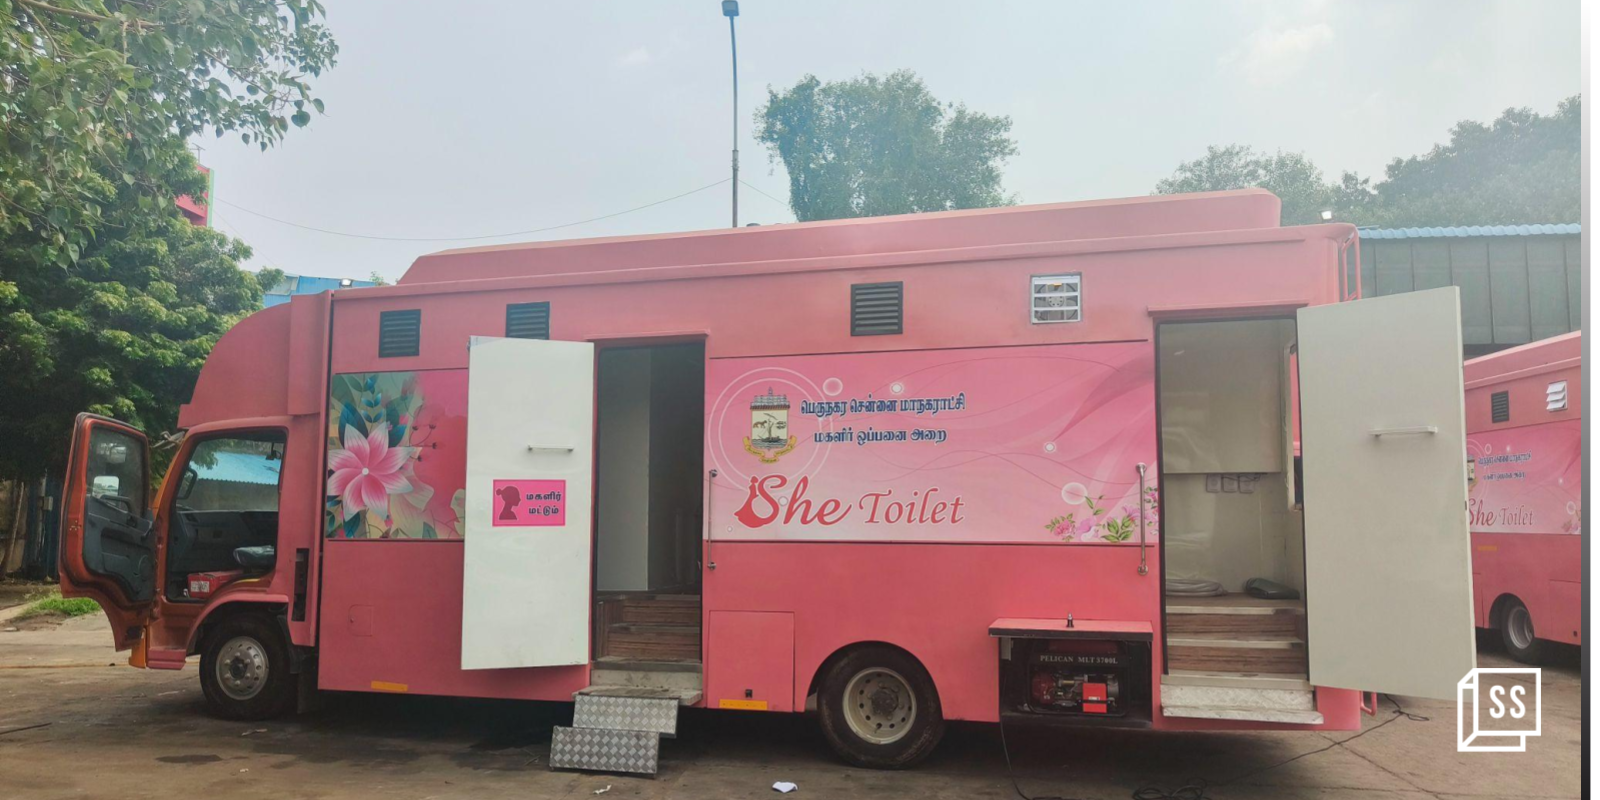 Chennai’s She Toilets instill hope for women and public service workers

